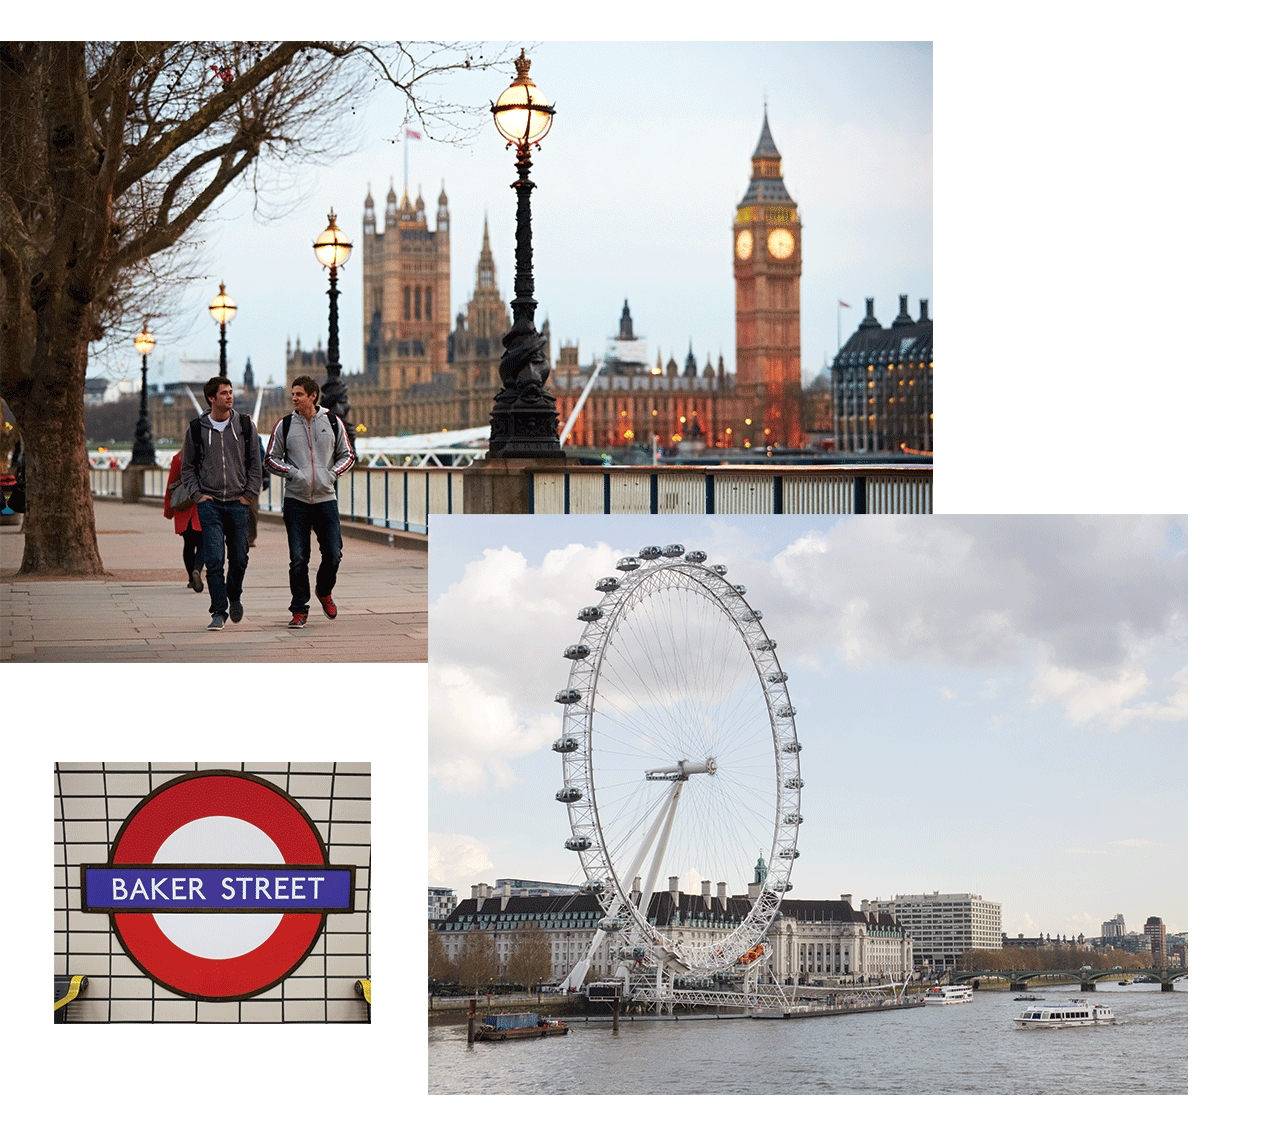 A collage of London (clockwise from top): two students walking along the Thames with Big Ben in the background, the London Eye, and the Baker Street metro sign.